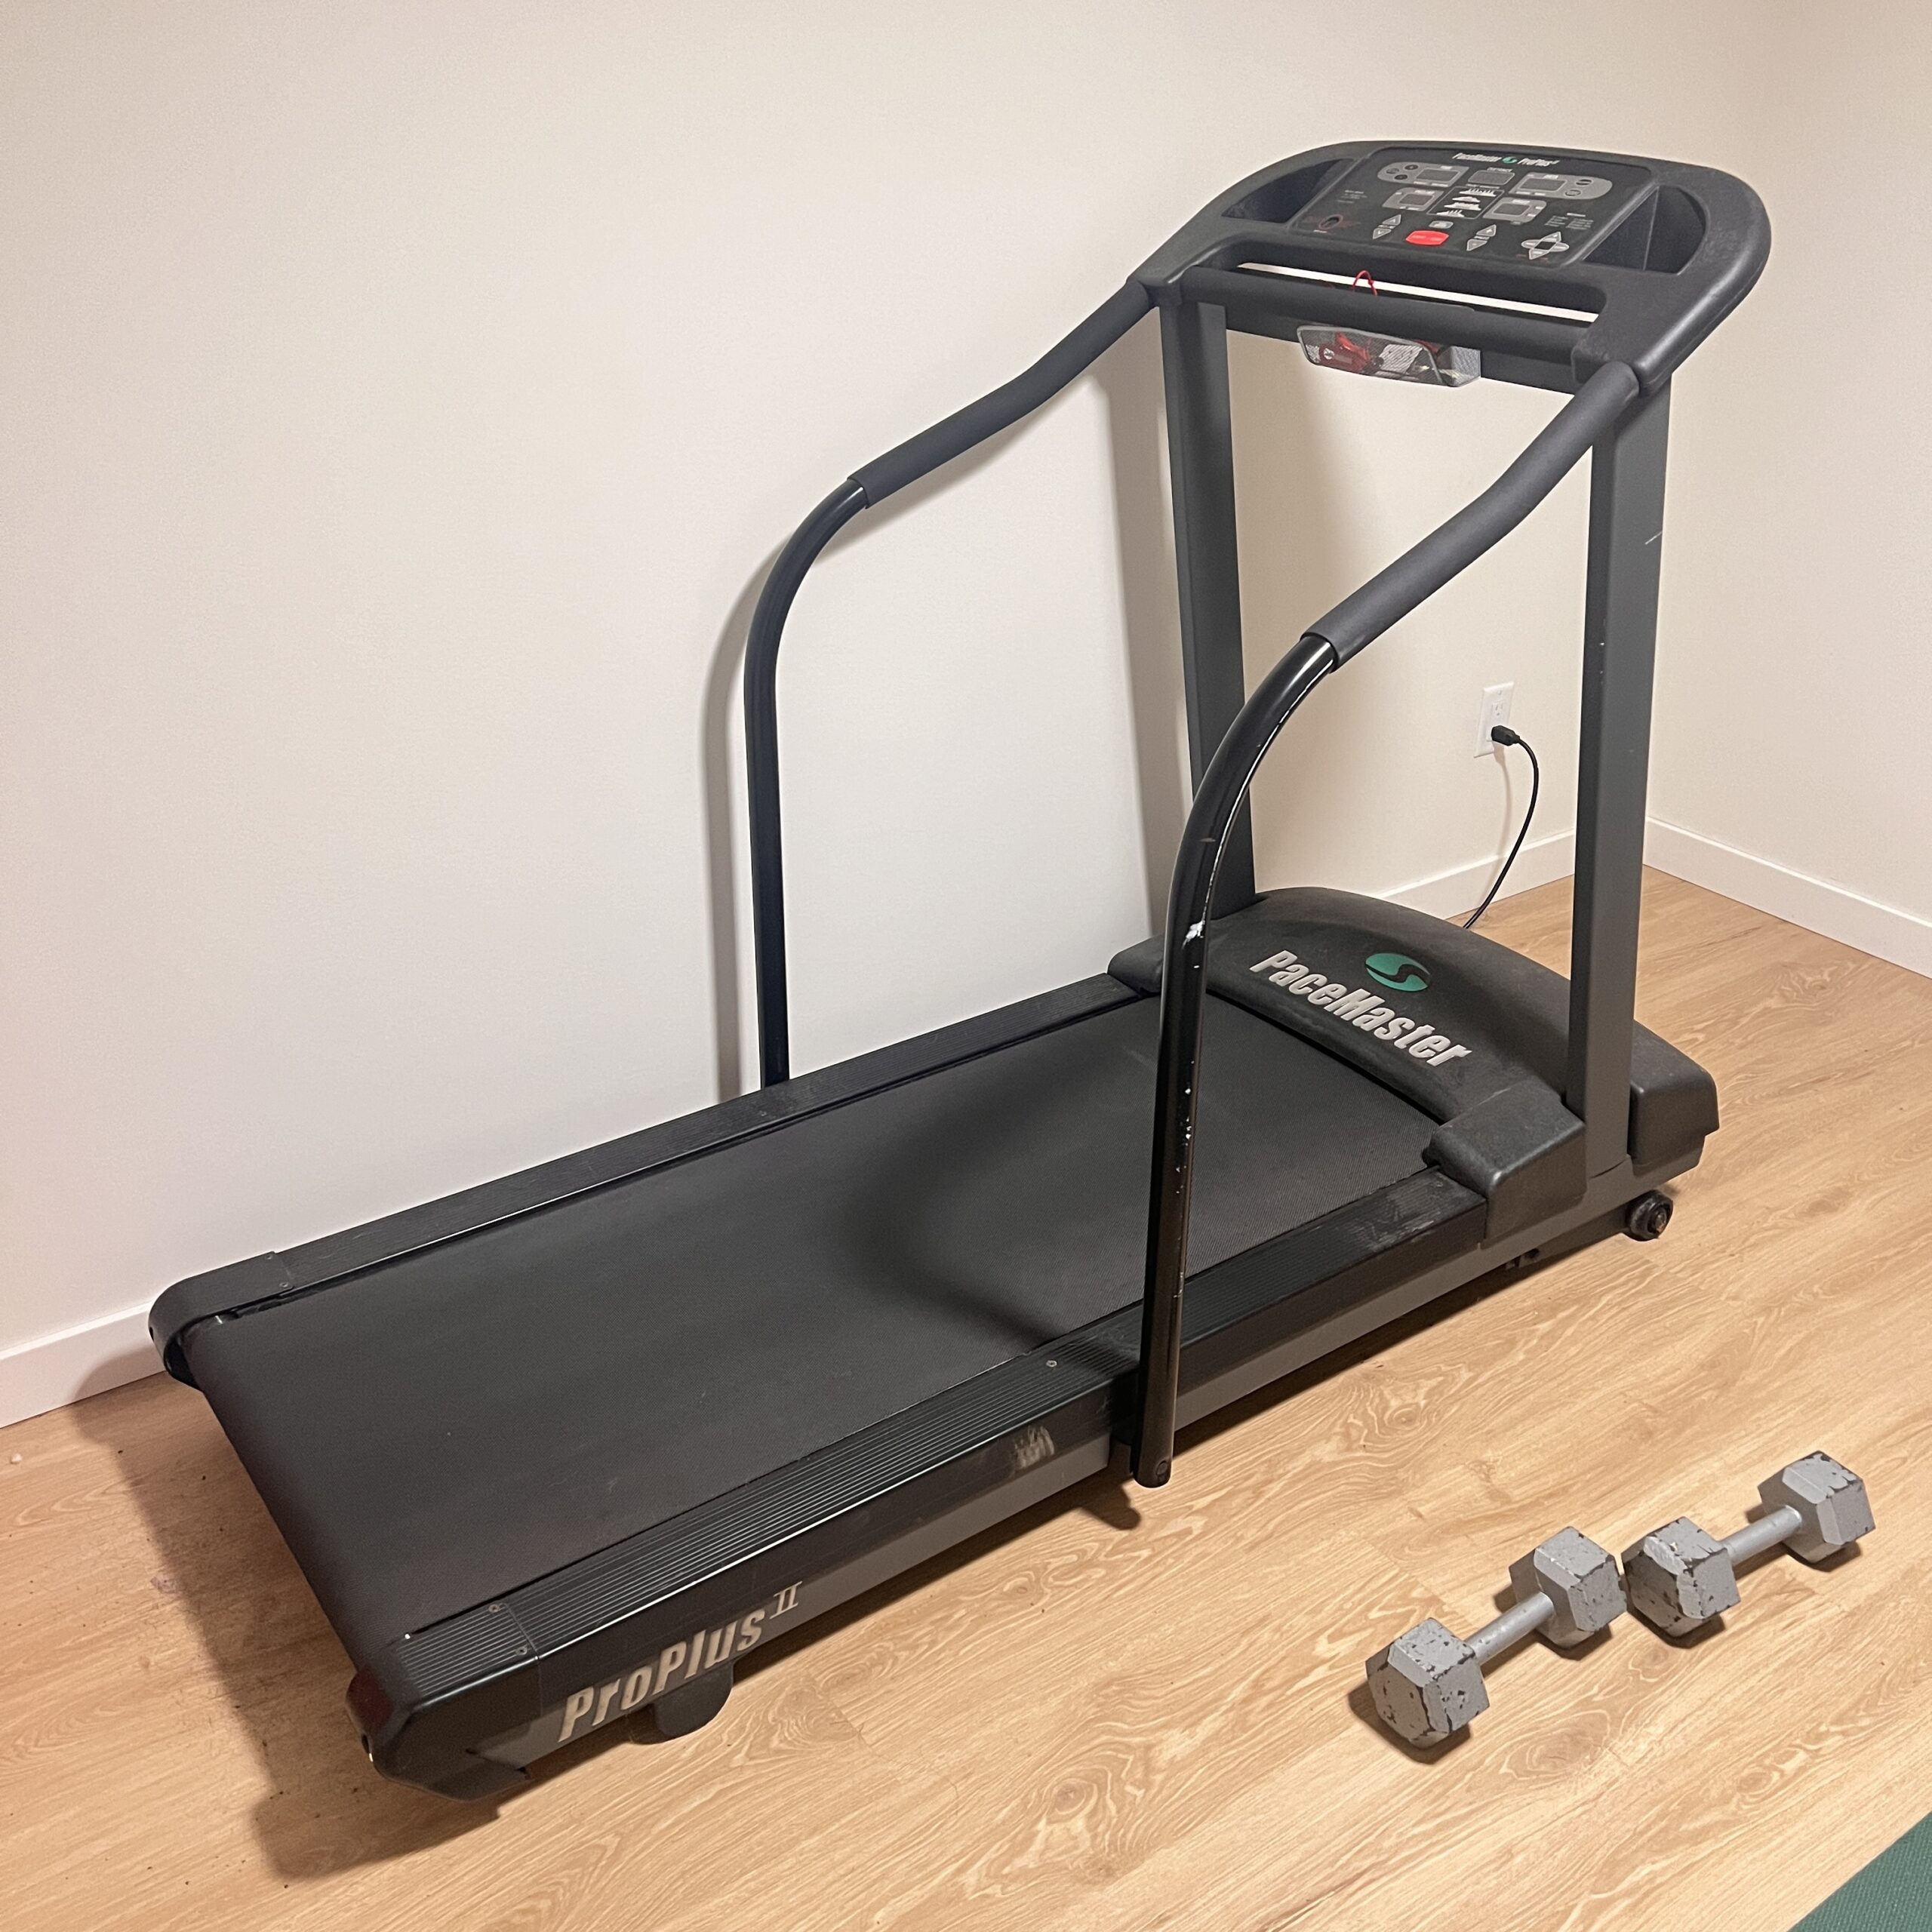 Old, broken down treadmill in a home gym, ready for exercise equipment removal and recycling.